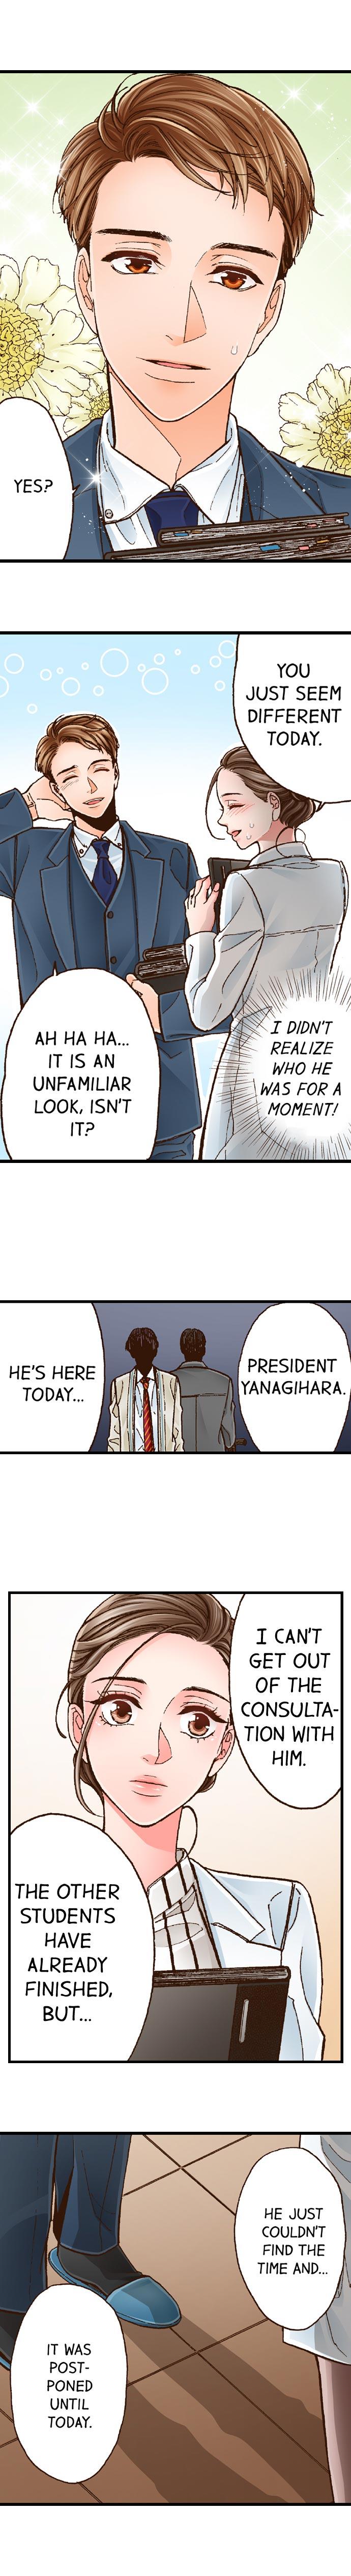 Yanagihara Is a Sex Addict - Chapter 13 Page 4